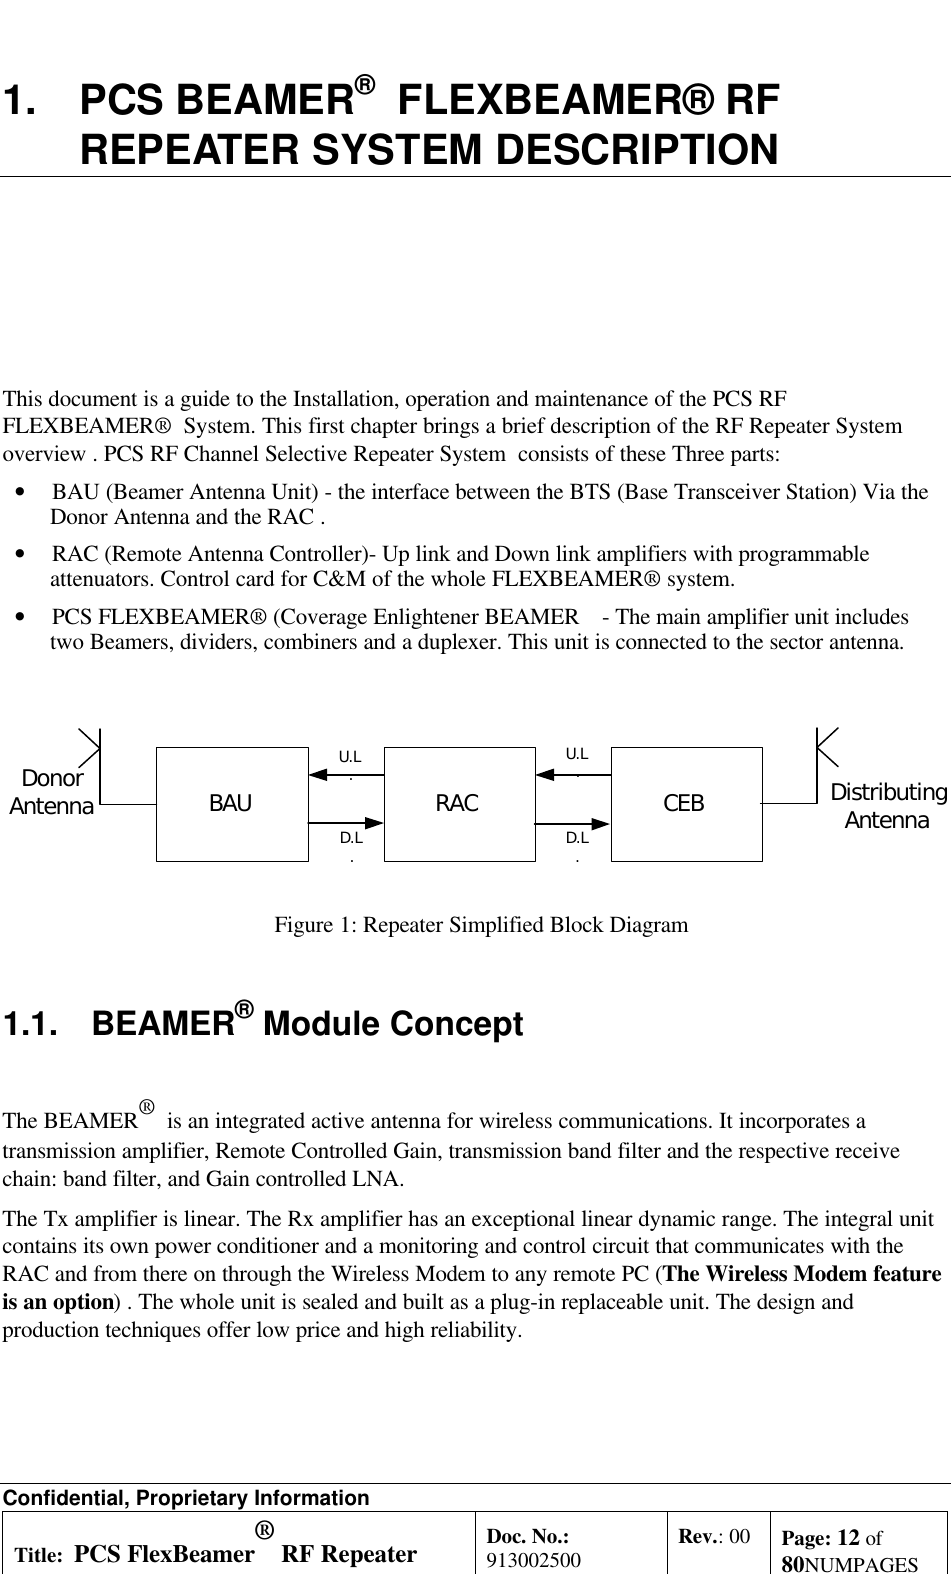 Confidential, Proprietary InformationTitle: PCS FlexBeamer® RF RepeaterSystem A &amp;O ManualDoc. No.:913002500 Rev.: 00 Page: 12 of80NUMPAGES1. PCS BEAMER®  FLEXBEAMER® RFREPEATER SYSTEM DESCRIPTIONThis document is a guide to the Installation, operation and maintenance of the PCS RFFLEXBEAMER®  System. This first chapter brings a brief description of the RF Repeater Systemoverview . PCS RF Channel Selective Repeater System  consists of these Three parts:• BAU (Beamer Antenna Unit) - the interface between the BTS (Base Transceiver Station) Via theDonor Antenna and the RAC .• RAC (Remote Antenna Controller)- Up link and Down link amplifiers with programmableattenuators. Control card for C&amp;M of the whole FLEXBEAMER® system.• PCS FLEXBEAMER® (Coverage Enlightener BEAMER  - The main amplifier unit includestwo Beamers, dividers, combiners and a duplexer. This unit is connected to the sector antenna.BAU RAC CEBDonorAntennaDistributingAntennaU.L.U.L.D.L.D.L.Figure 1: Repeater Simplified Block Diagram1.1. BEAMER® Module ConceptThe BEAMER®  is an integrated active antenna for wireless communications. It incorporates atransmission amplifier, Remote Controlled Gain, transmission band filter and the respective receivechain: band filter, and Gain controlled LNA.The Tx amplifier is linear. The Rx amplifier has an exceptional linear dynamic range. The integral unitcontains its own power conditioner and a monitoring and control circuit that communicates with theRAC and from there on through the Wireless Modem to any remote PC (The Wireless Modem featureis an option) . The whole unit is sealed and built as a plug-in replaceable unit. The design andproduction techniques offer low price and high reliability.